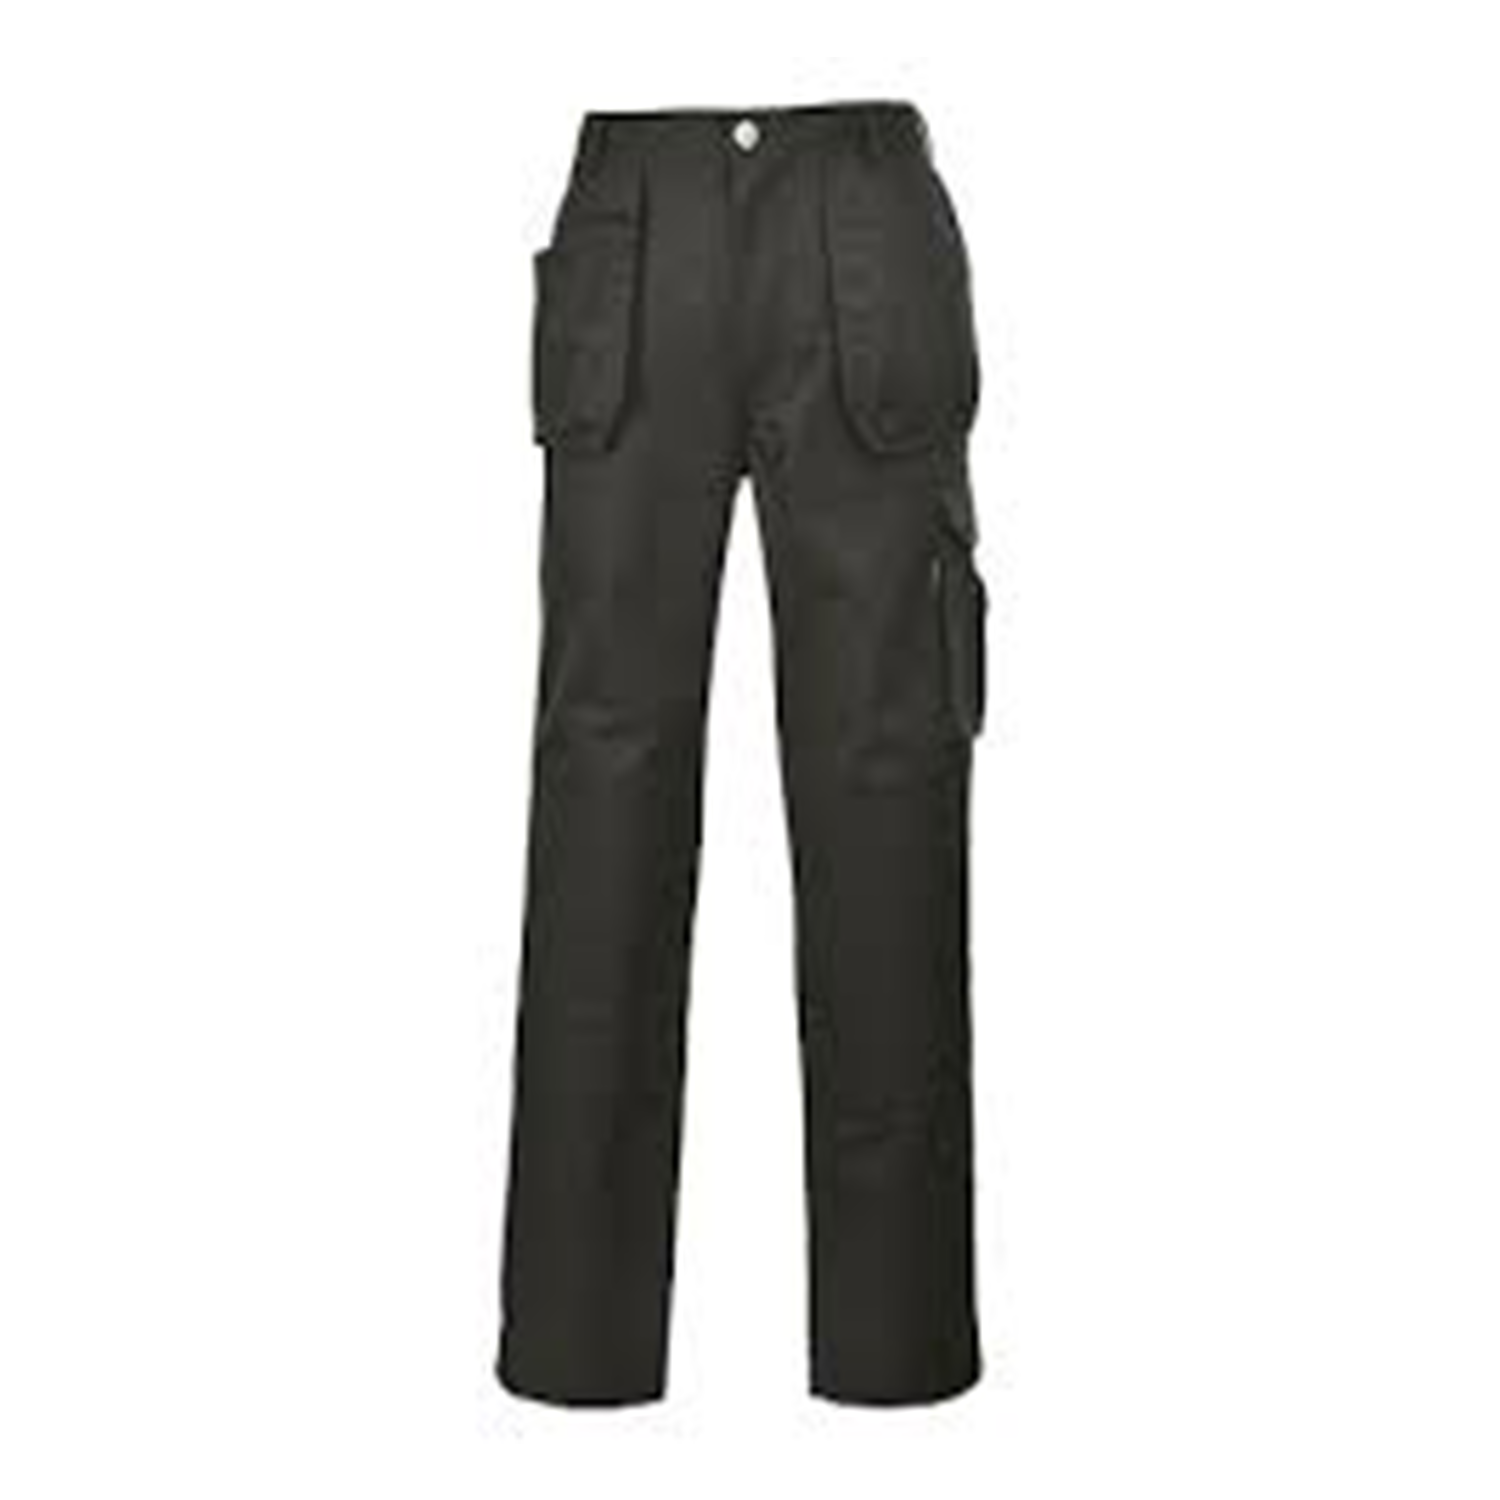 Share 74+ safety work pants super hot - in.eteachers